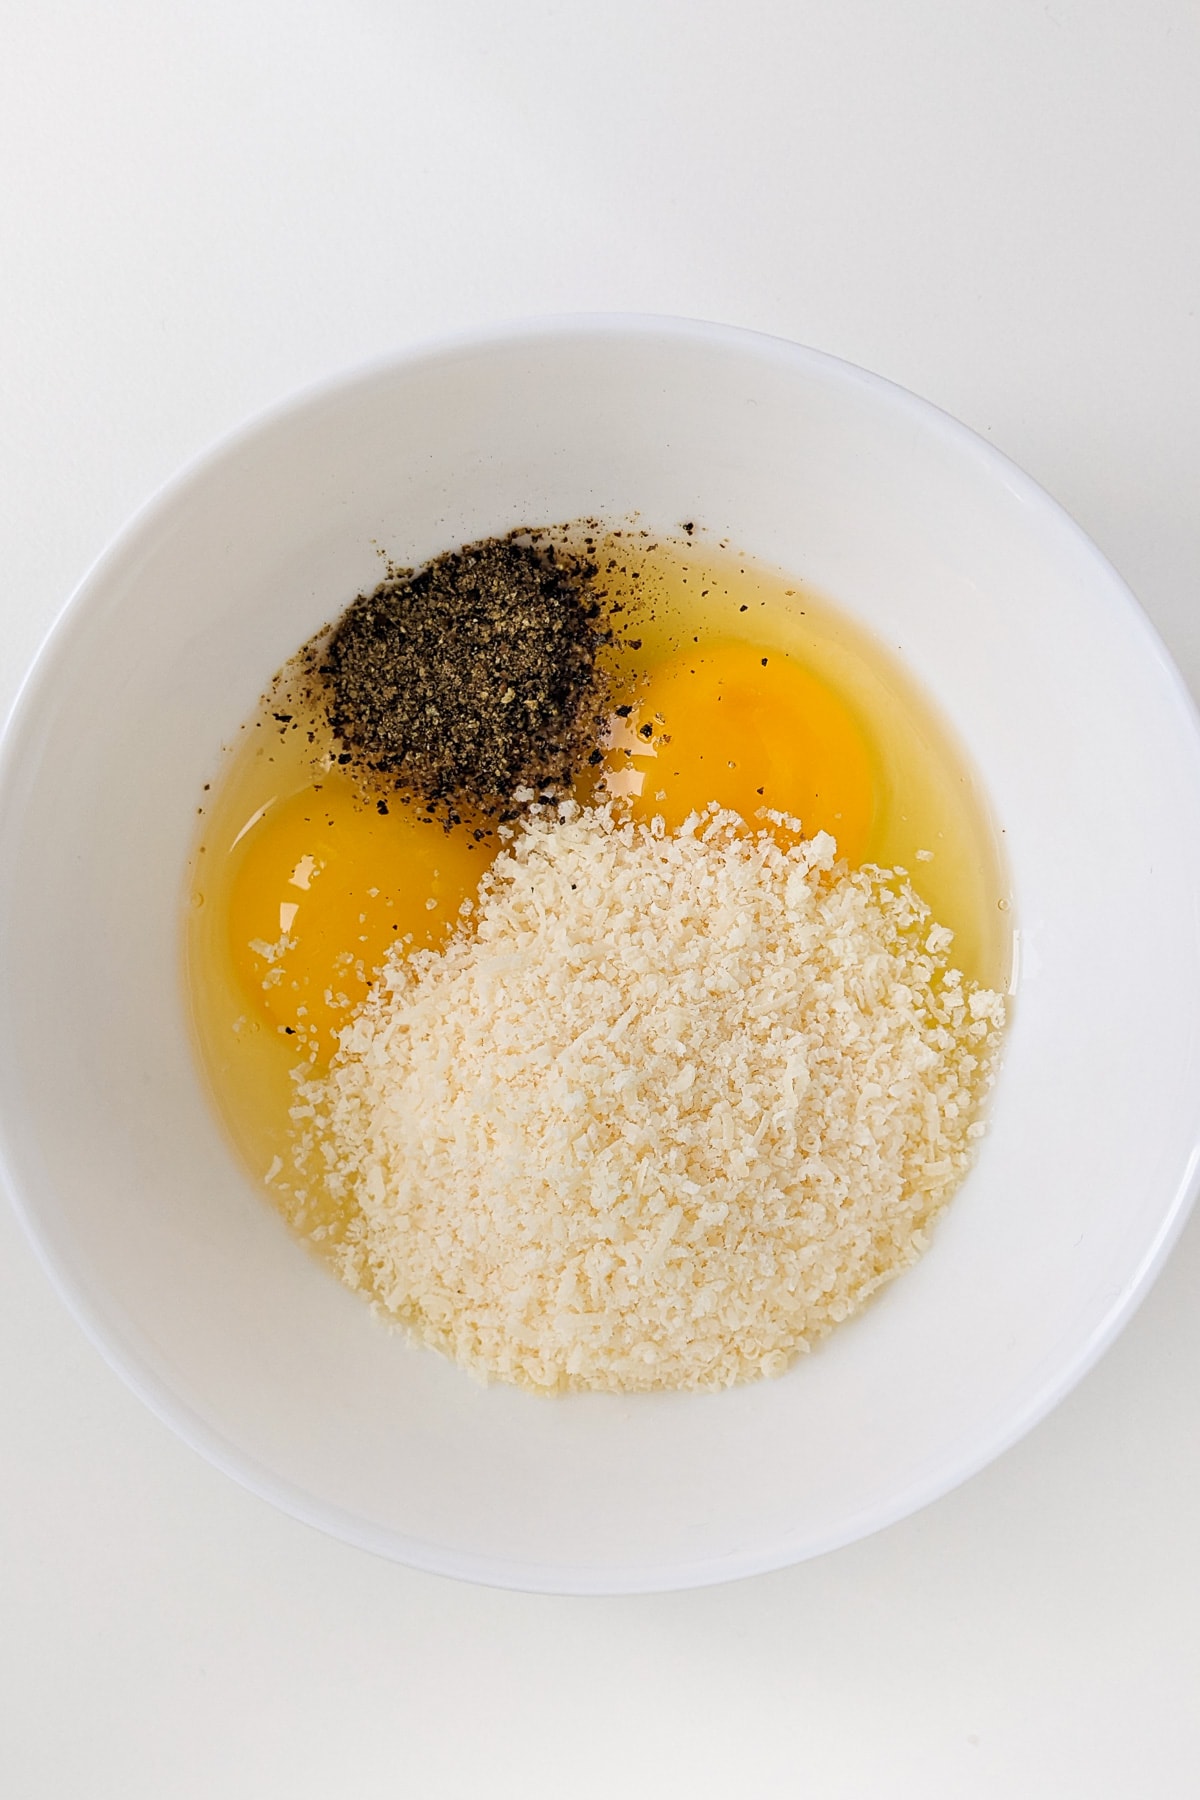 Top view of two raw eggs with black pepper and parmesan cheese.